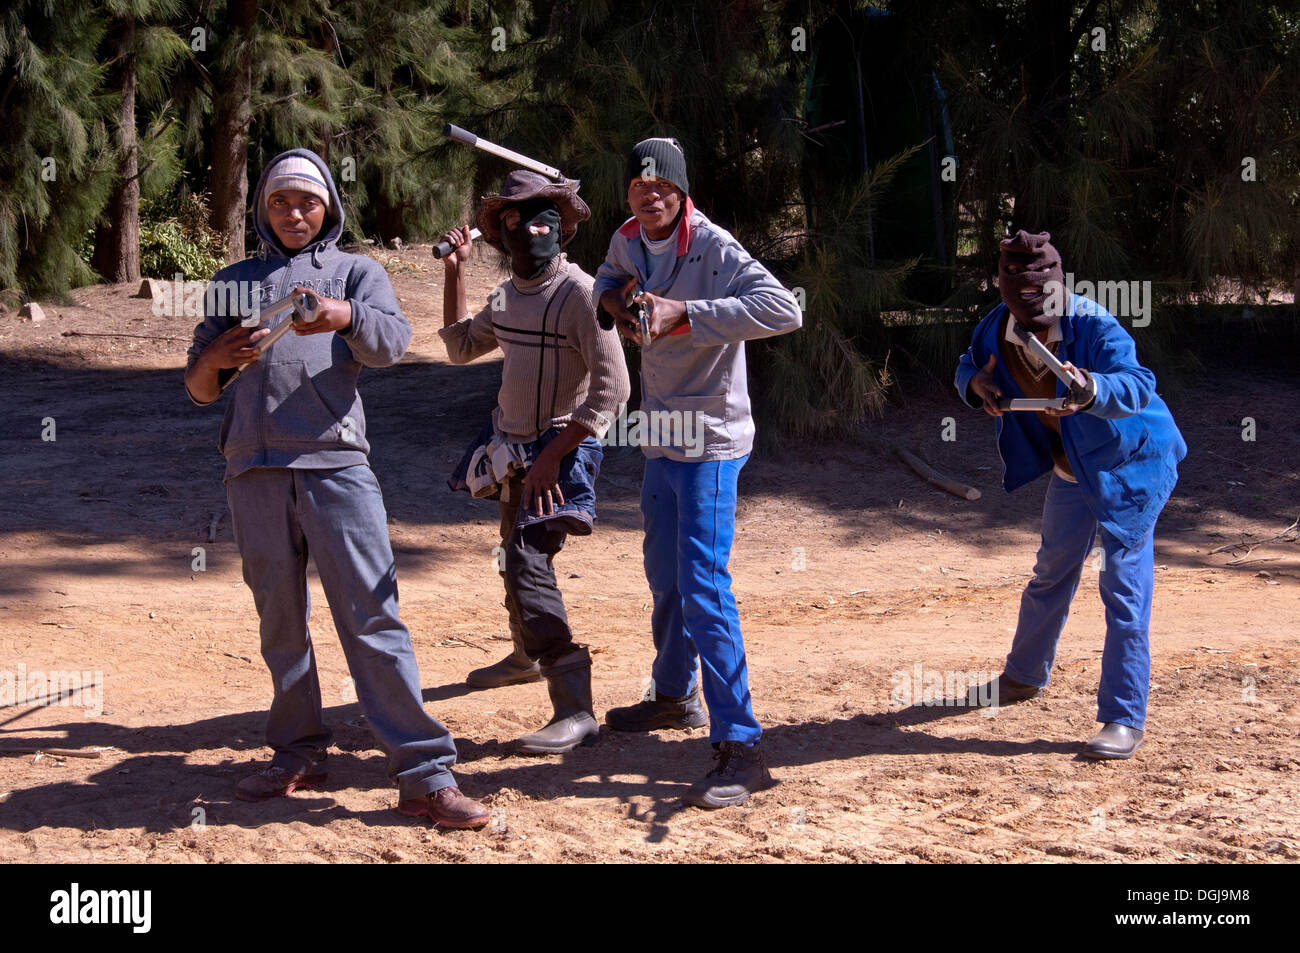 Partially masked men armed with tools in a threatening posture, Clanwilliam, Western Cape Province, South Africa, Africa Stock Photo